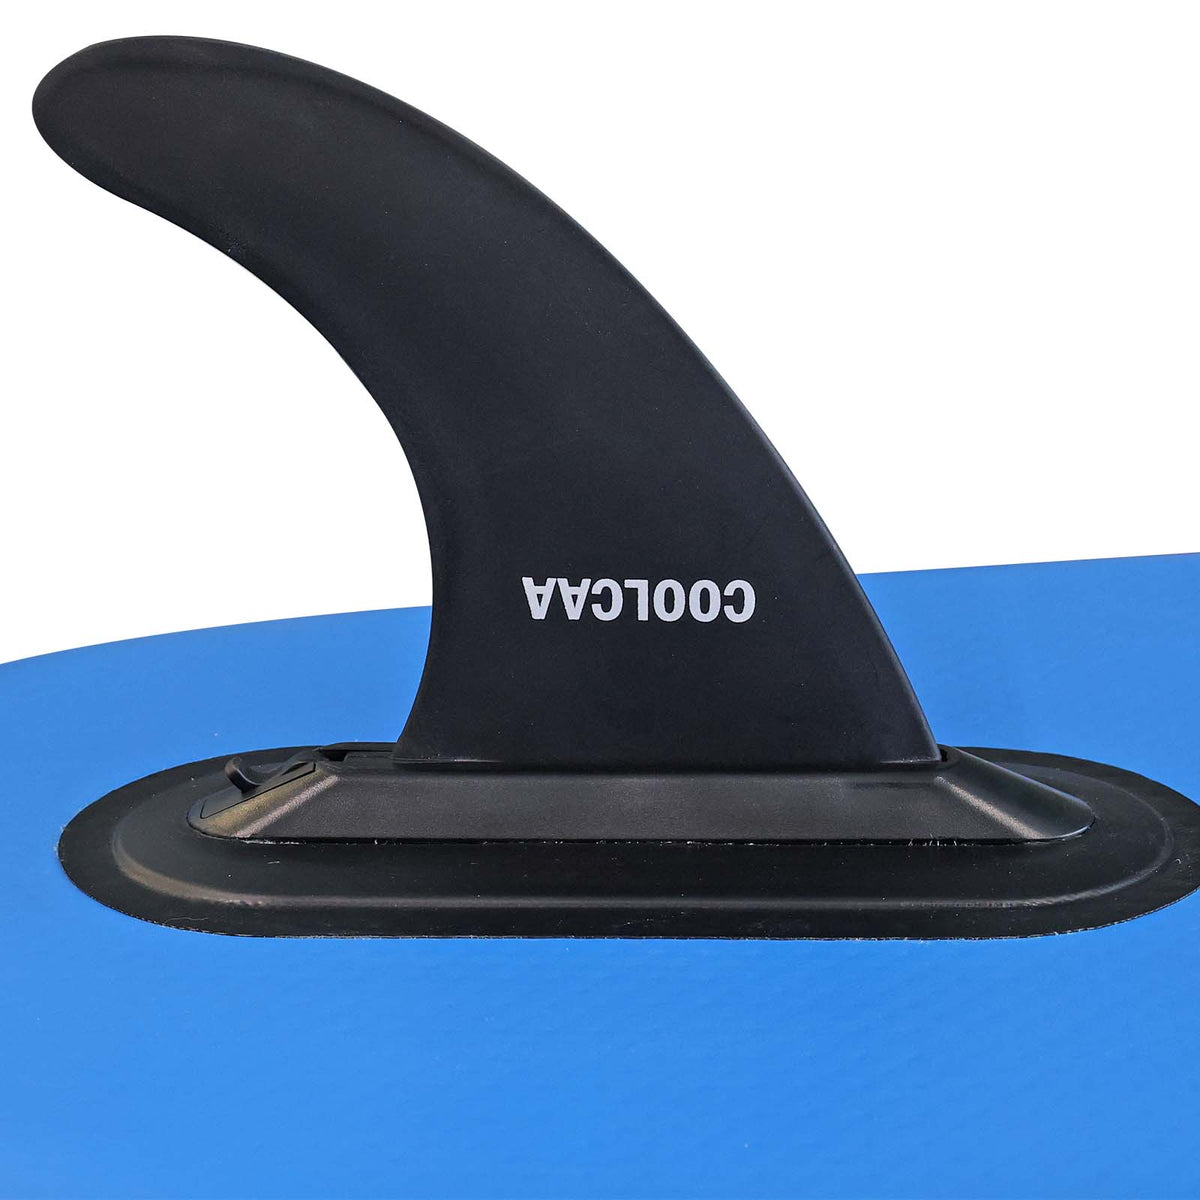 Enhanced Stability with COOLCAA Fin